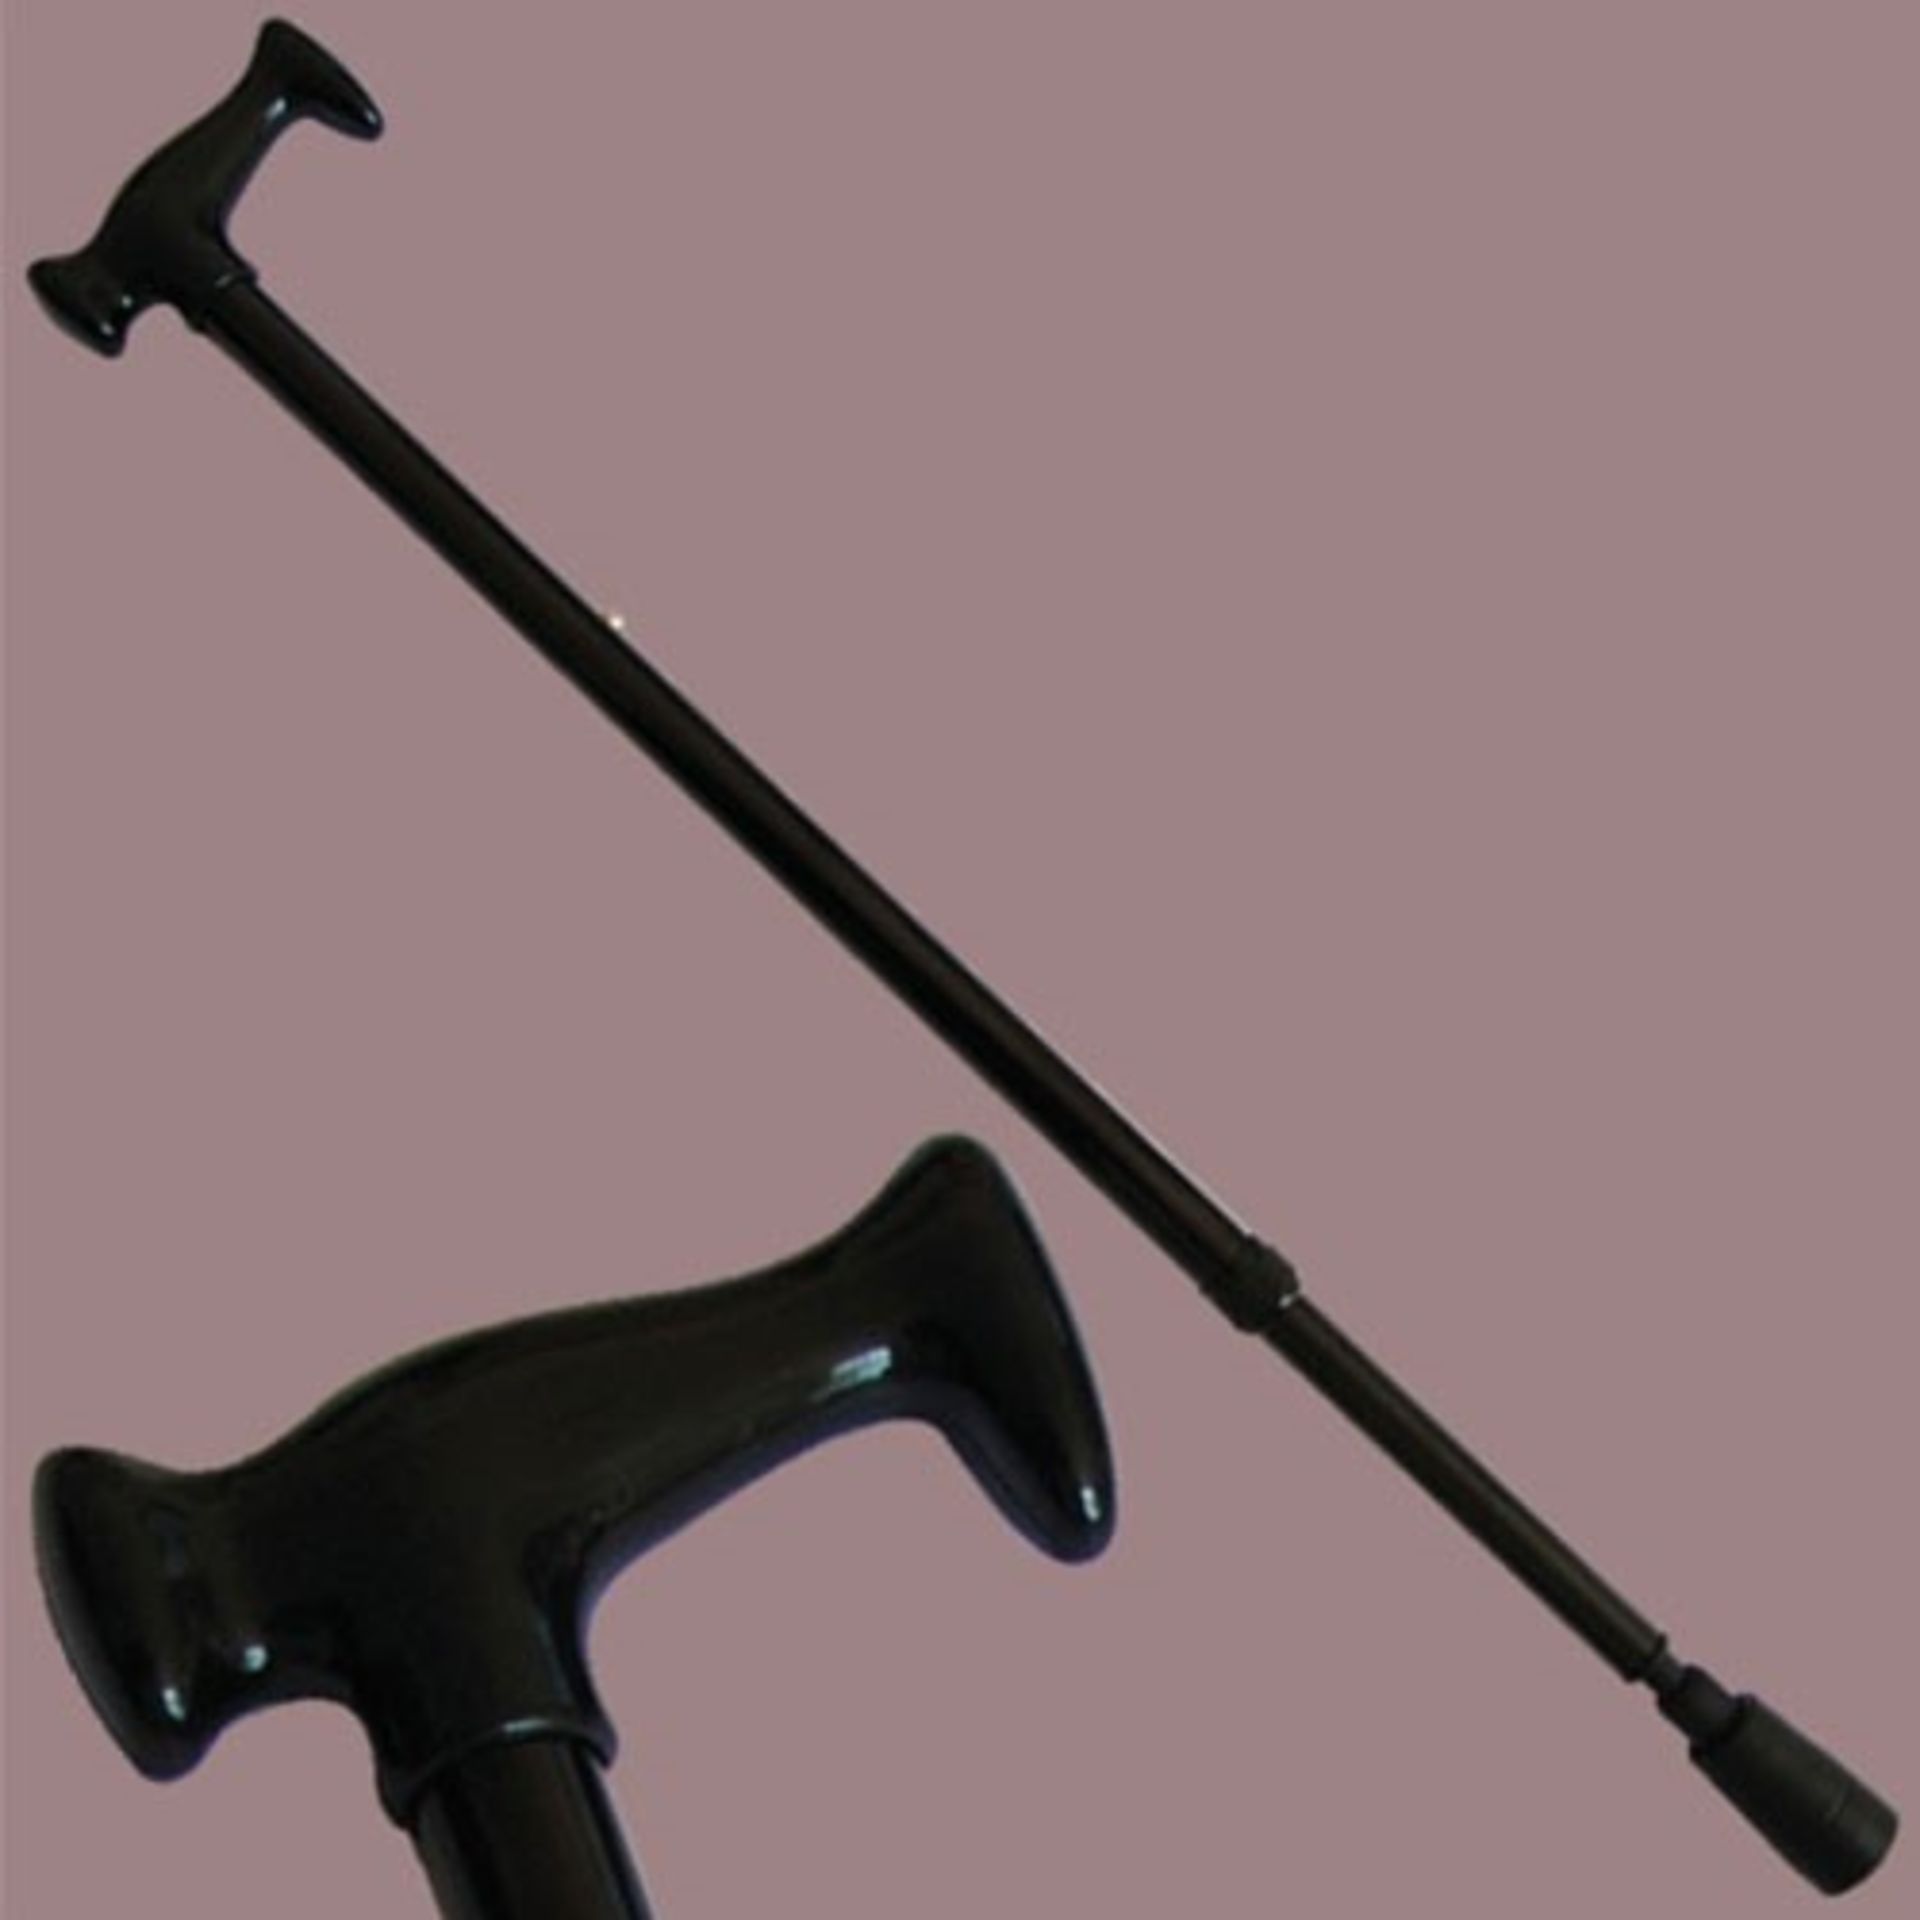 ME; 1 AS NEW PACKAGED SPRINGER CUSHIONED SHOCK ABSORBED WALKING STICK IN BLACK / RRP £26.00 (VIEWING